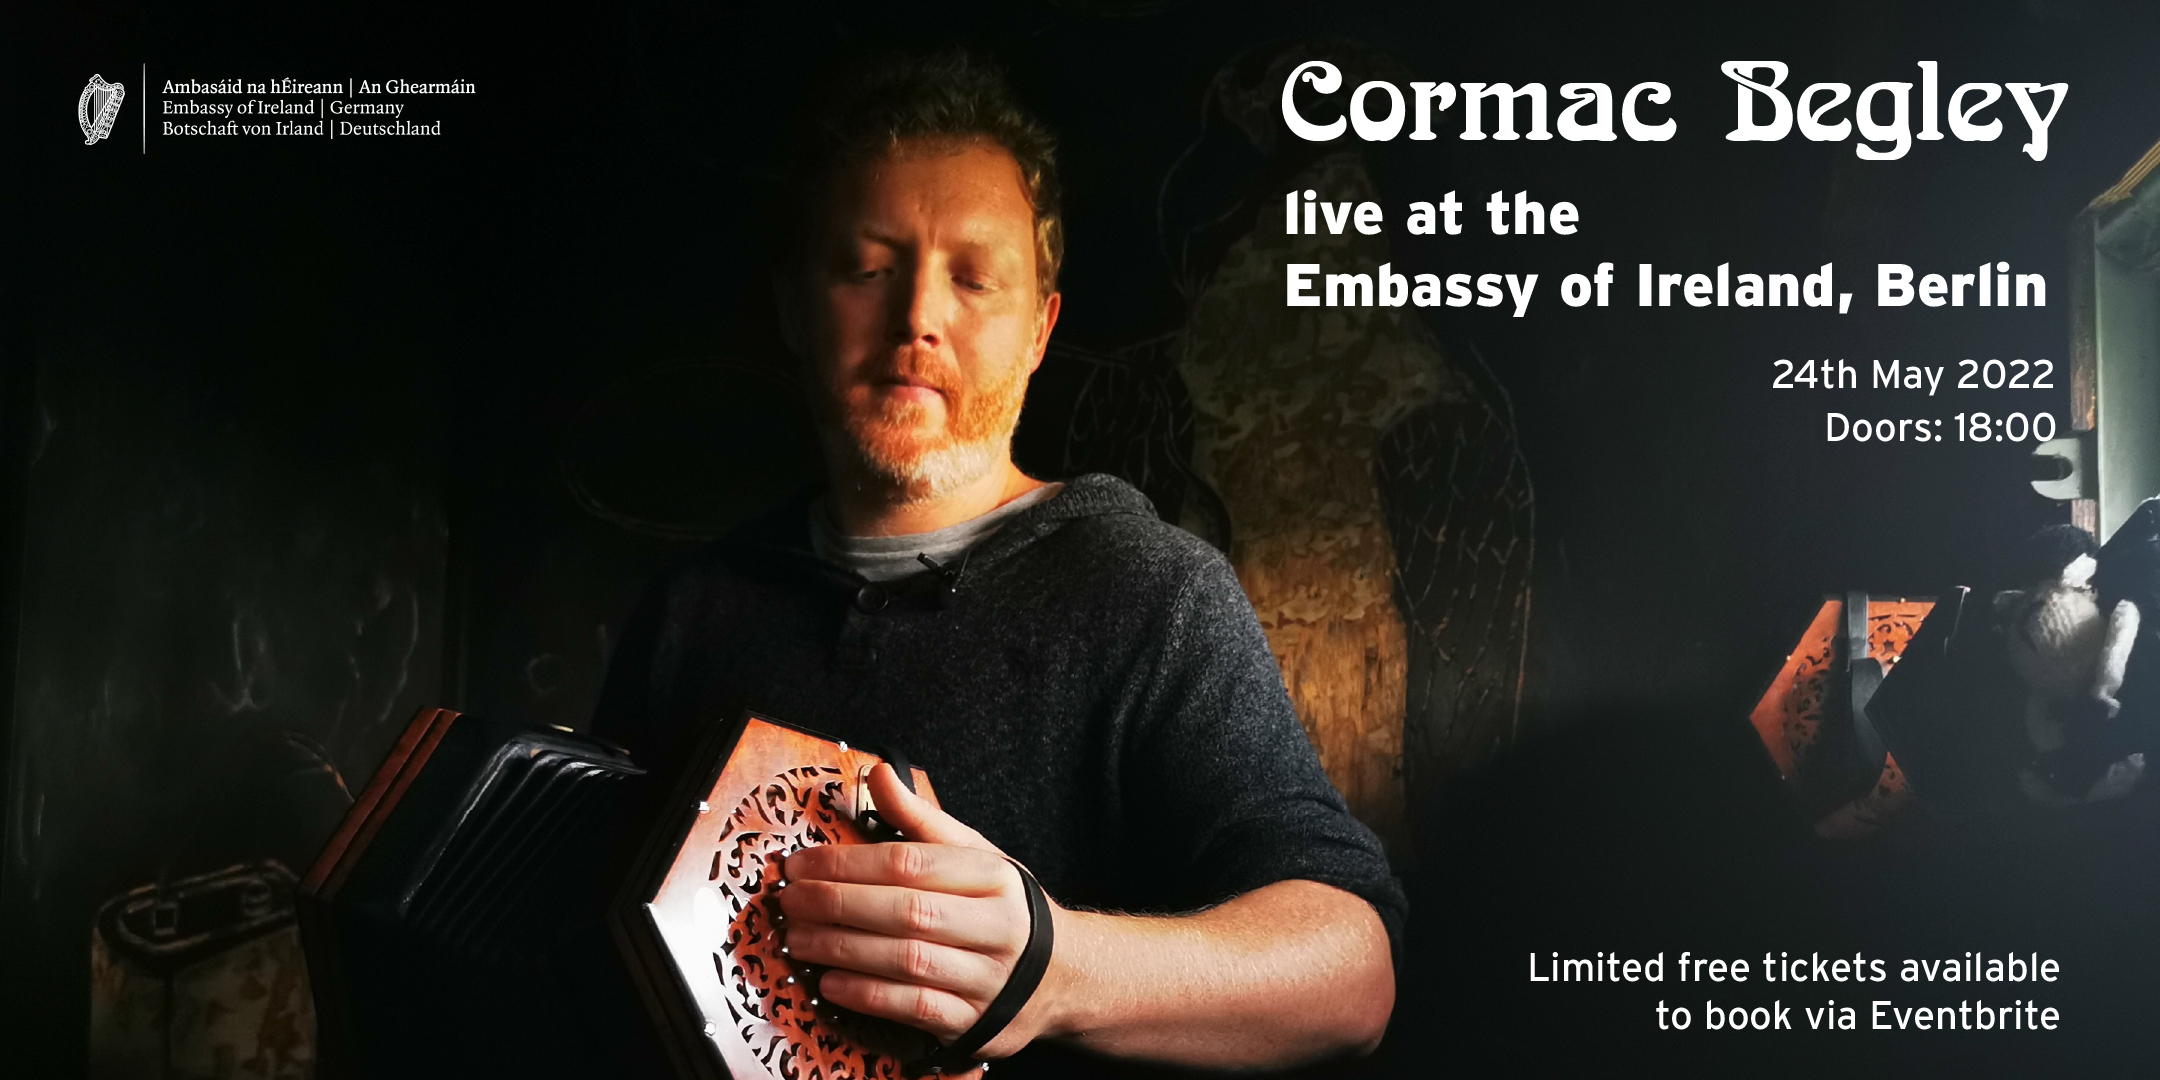 Cormac Begley Concert at the Embassy on 24 May 2022